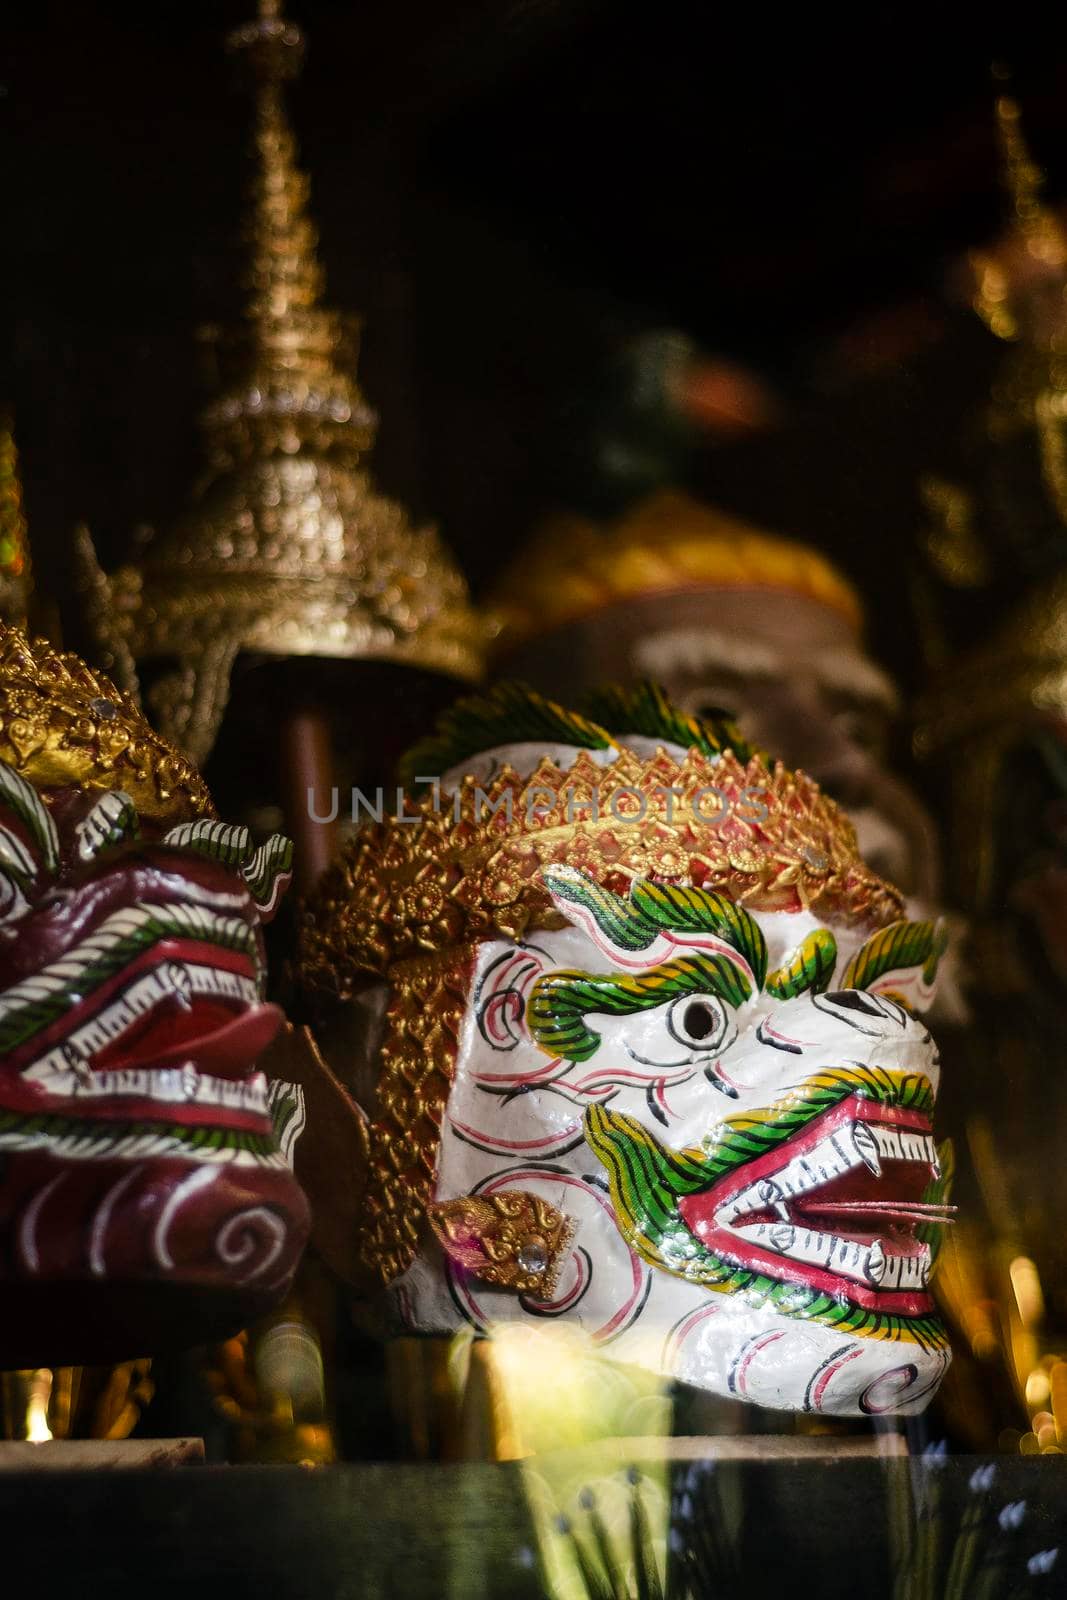 traditional lakhon khol khmer dance masks in display in cambodia by jackmalipan